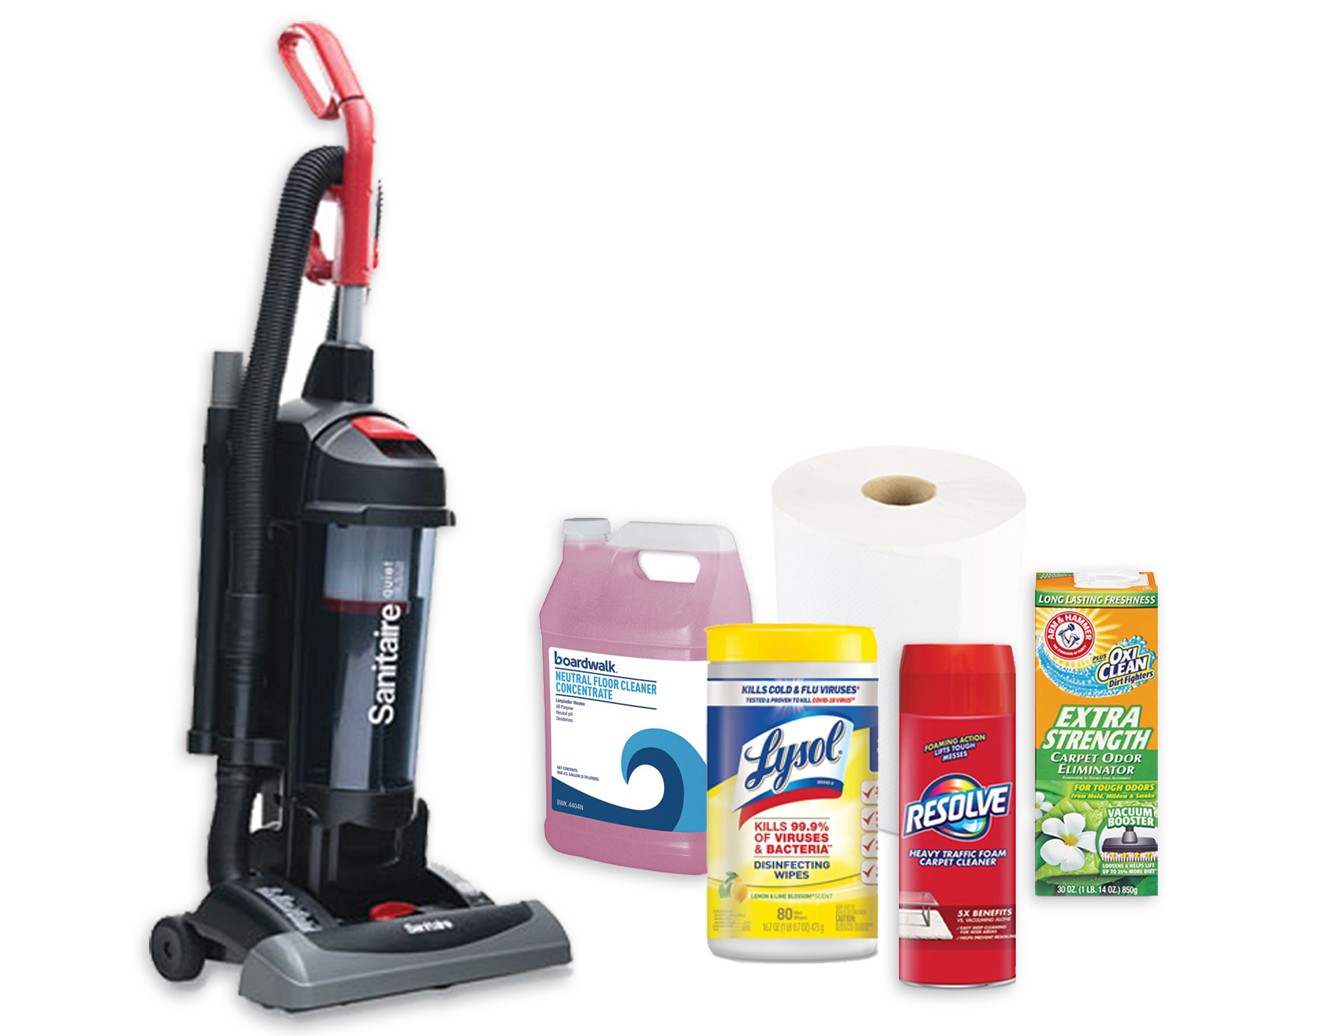 A vacuum cleaning plus miscellaneous cleaning products for the office